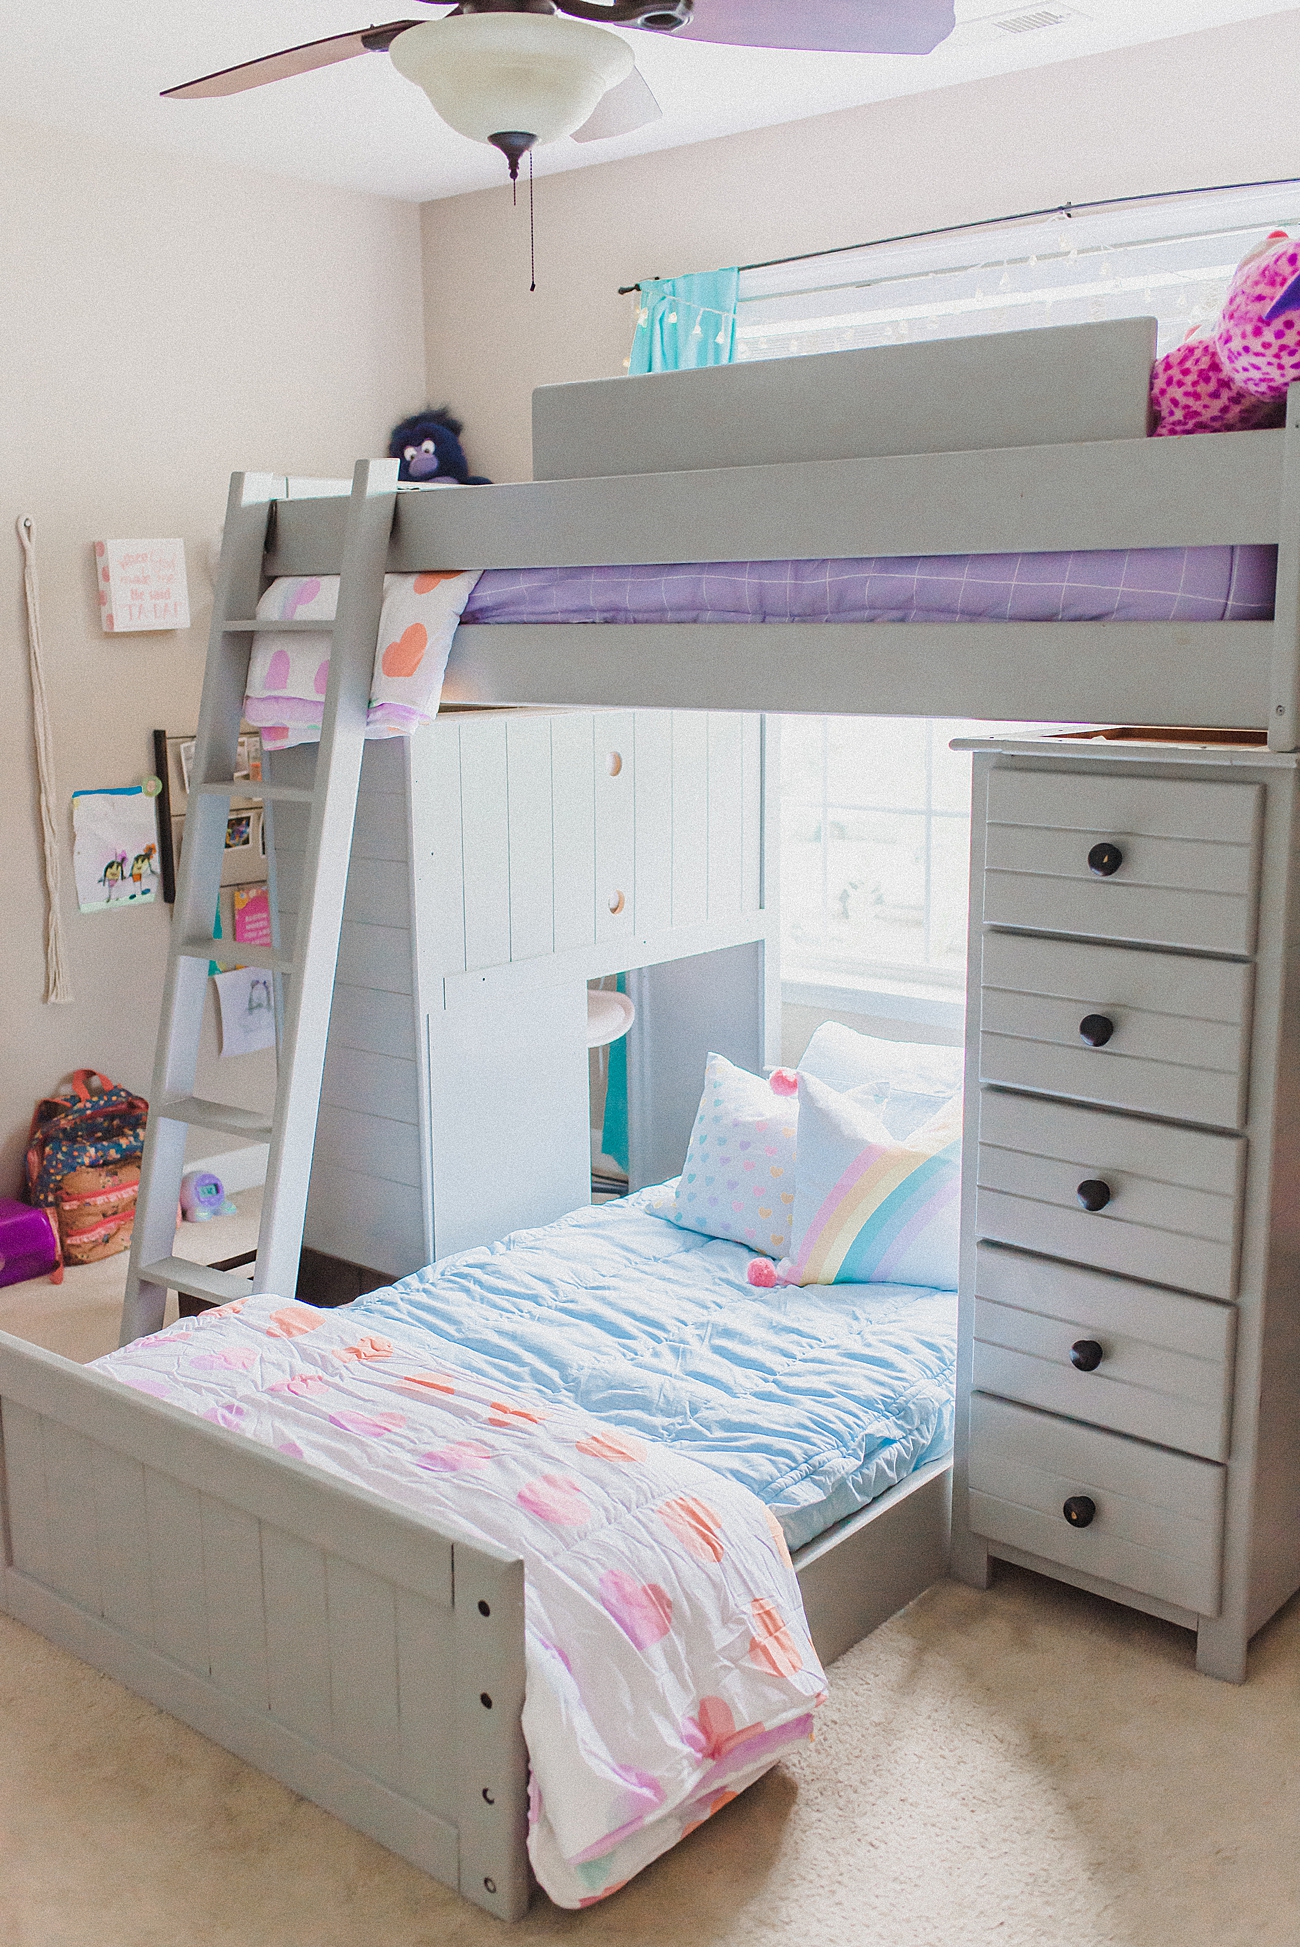 The Best Bedding For Bunk Beds Beddy, Zipper Bedding For Bunk Beds